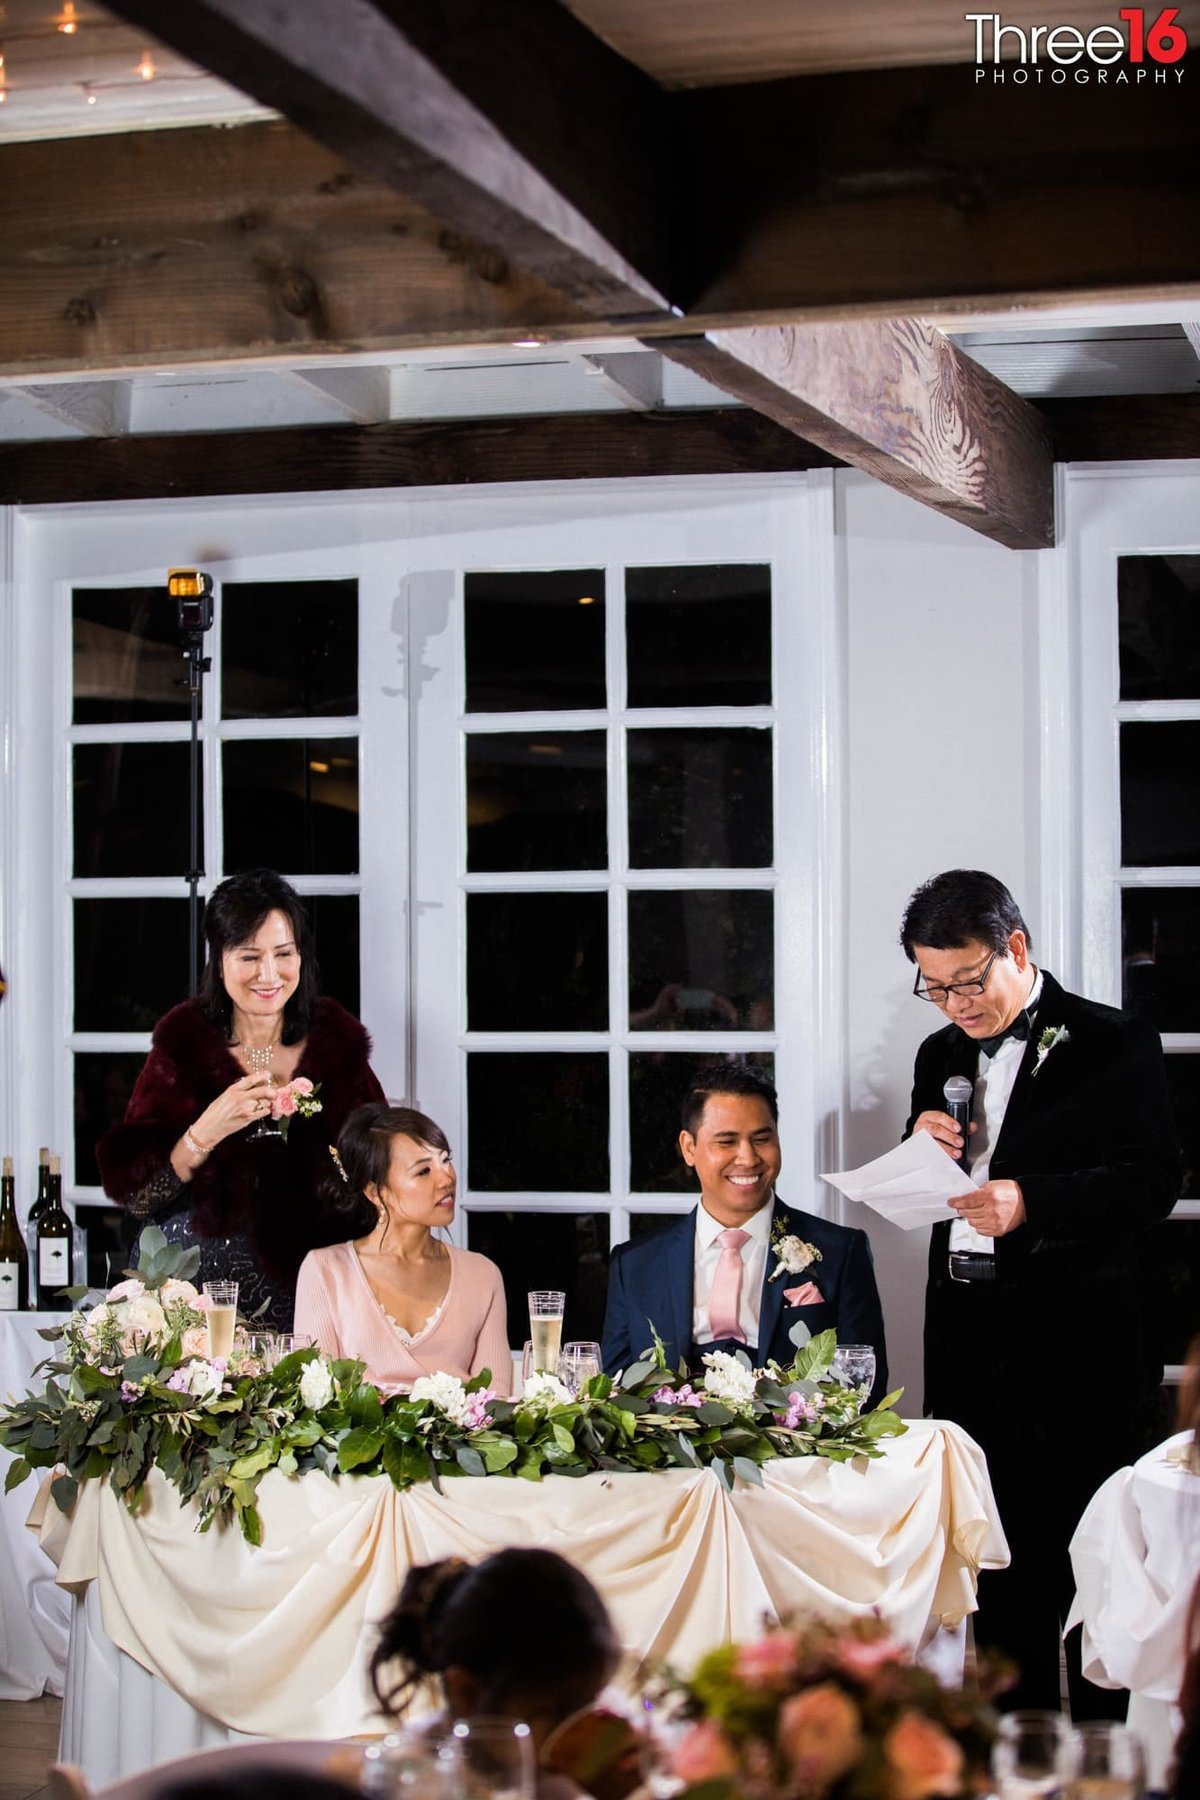 Best Man toasts the newly married couple at the wedding reception